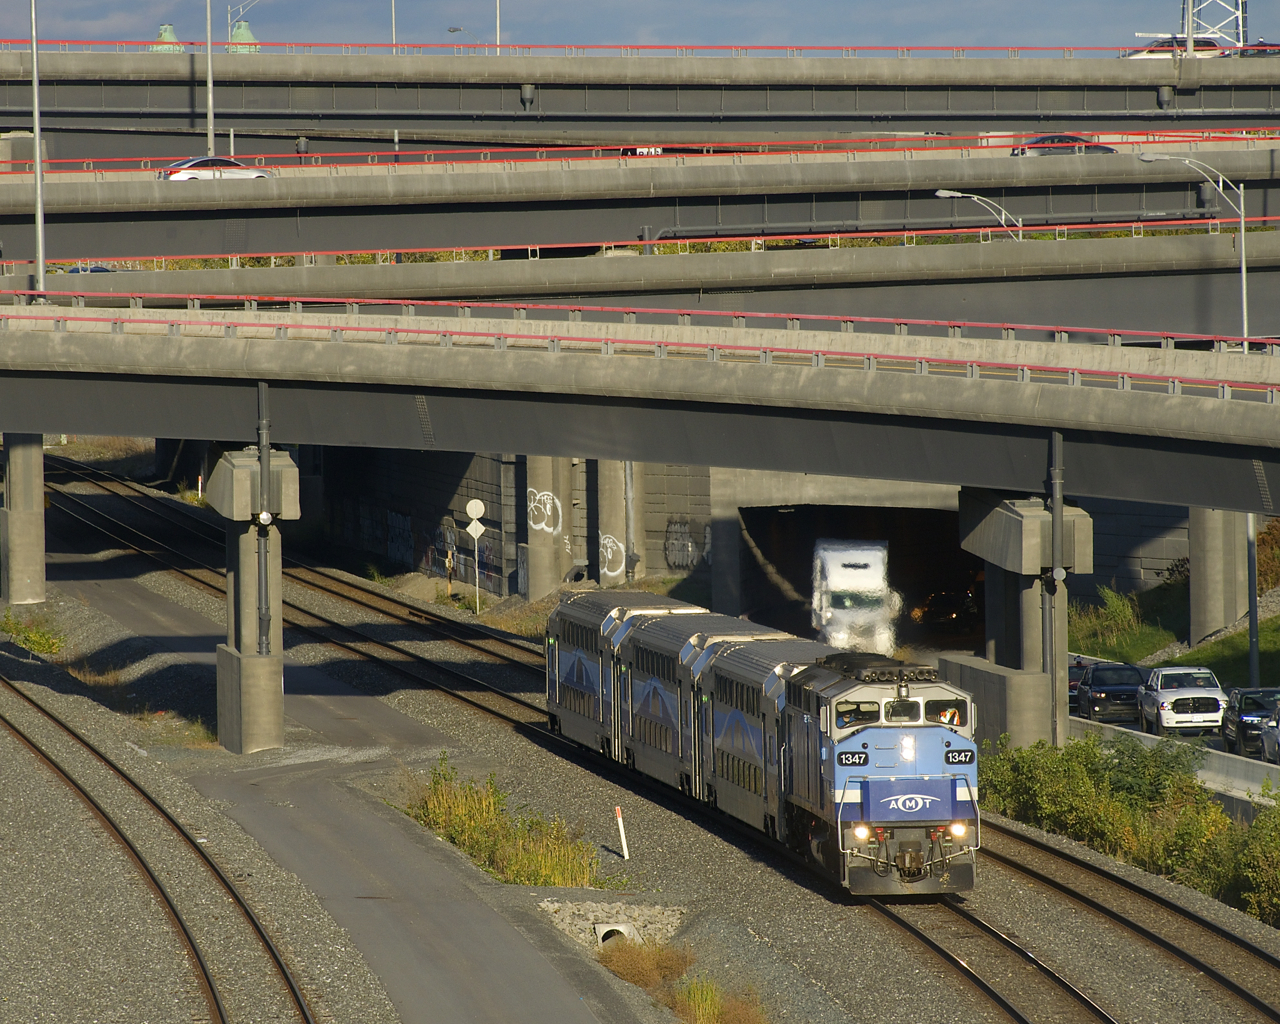 The first departure of the afternoon from Central Station for Mascouche has just passed under the Turcot Interchange with AMT 1347 and three multilevel cars.